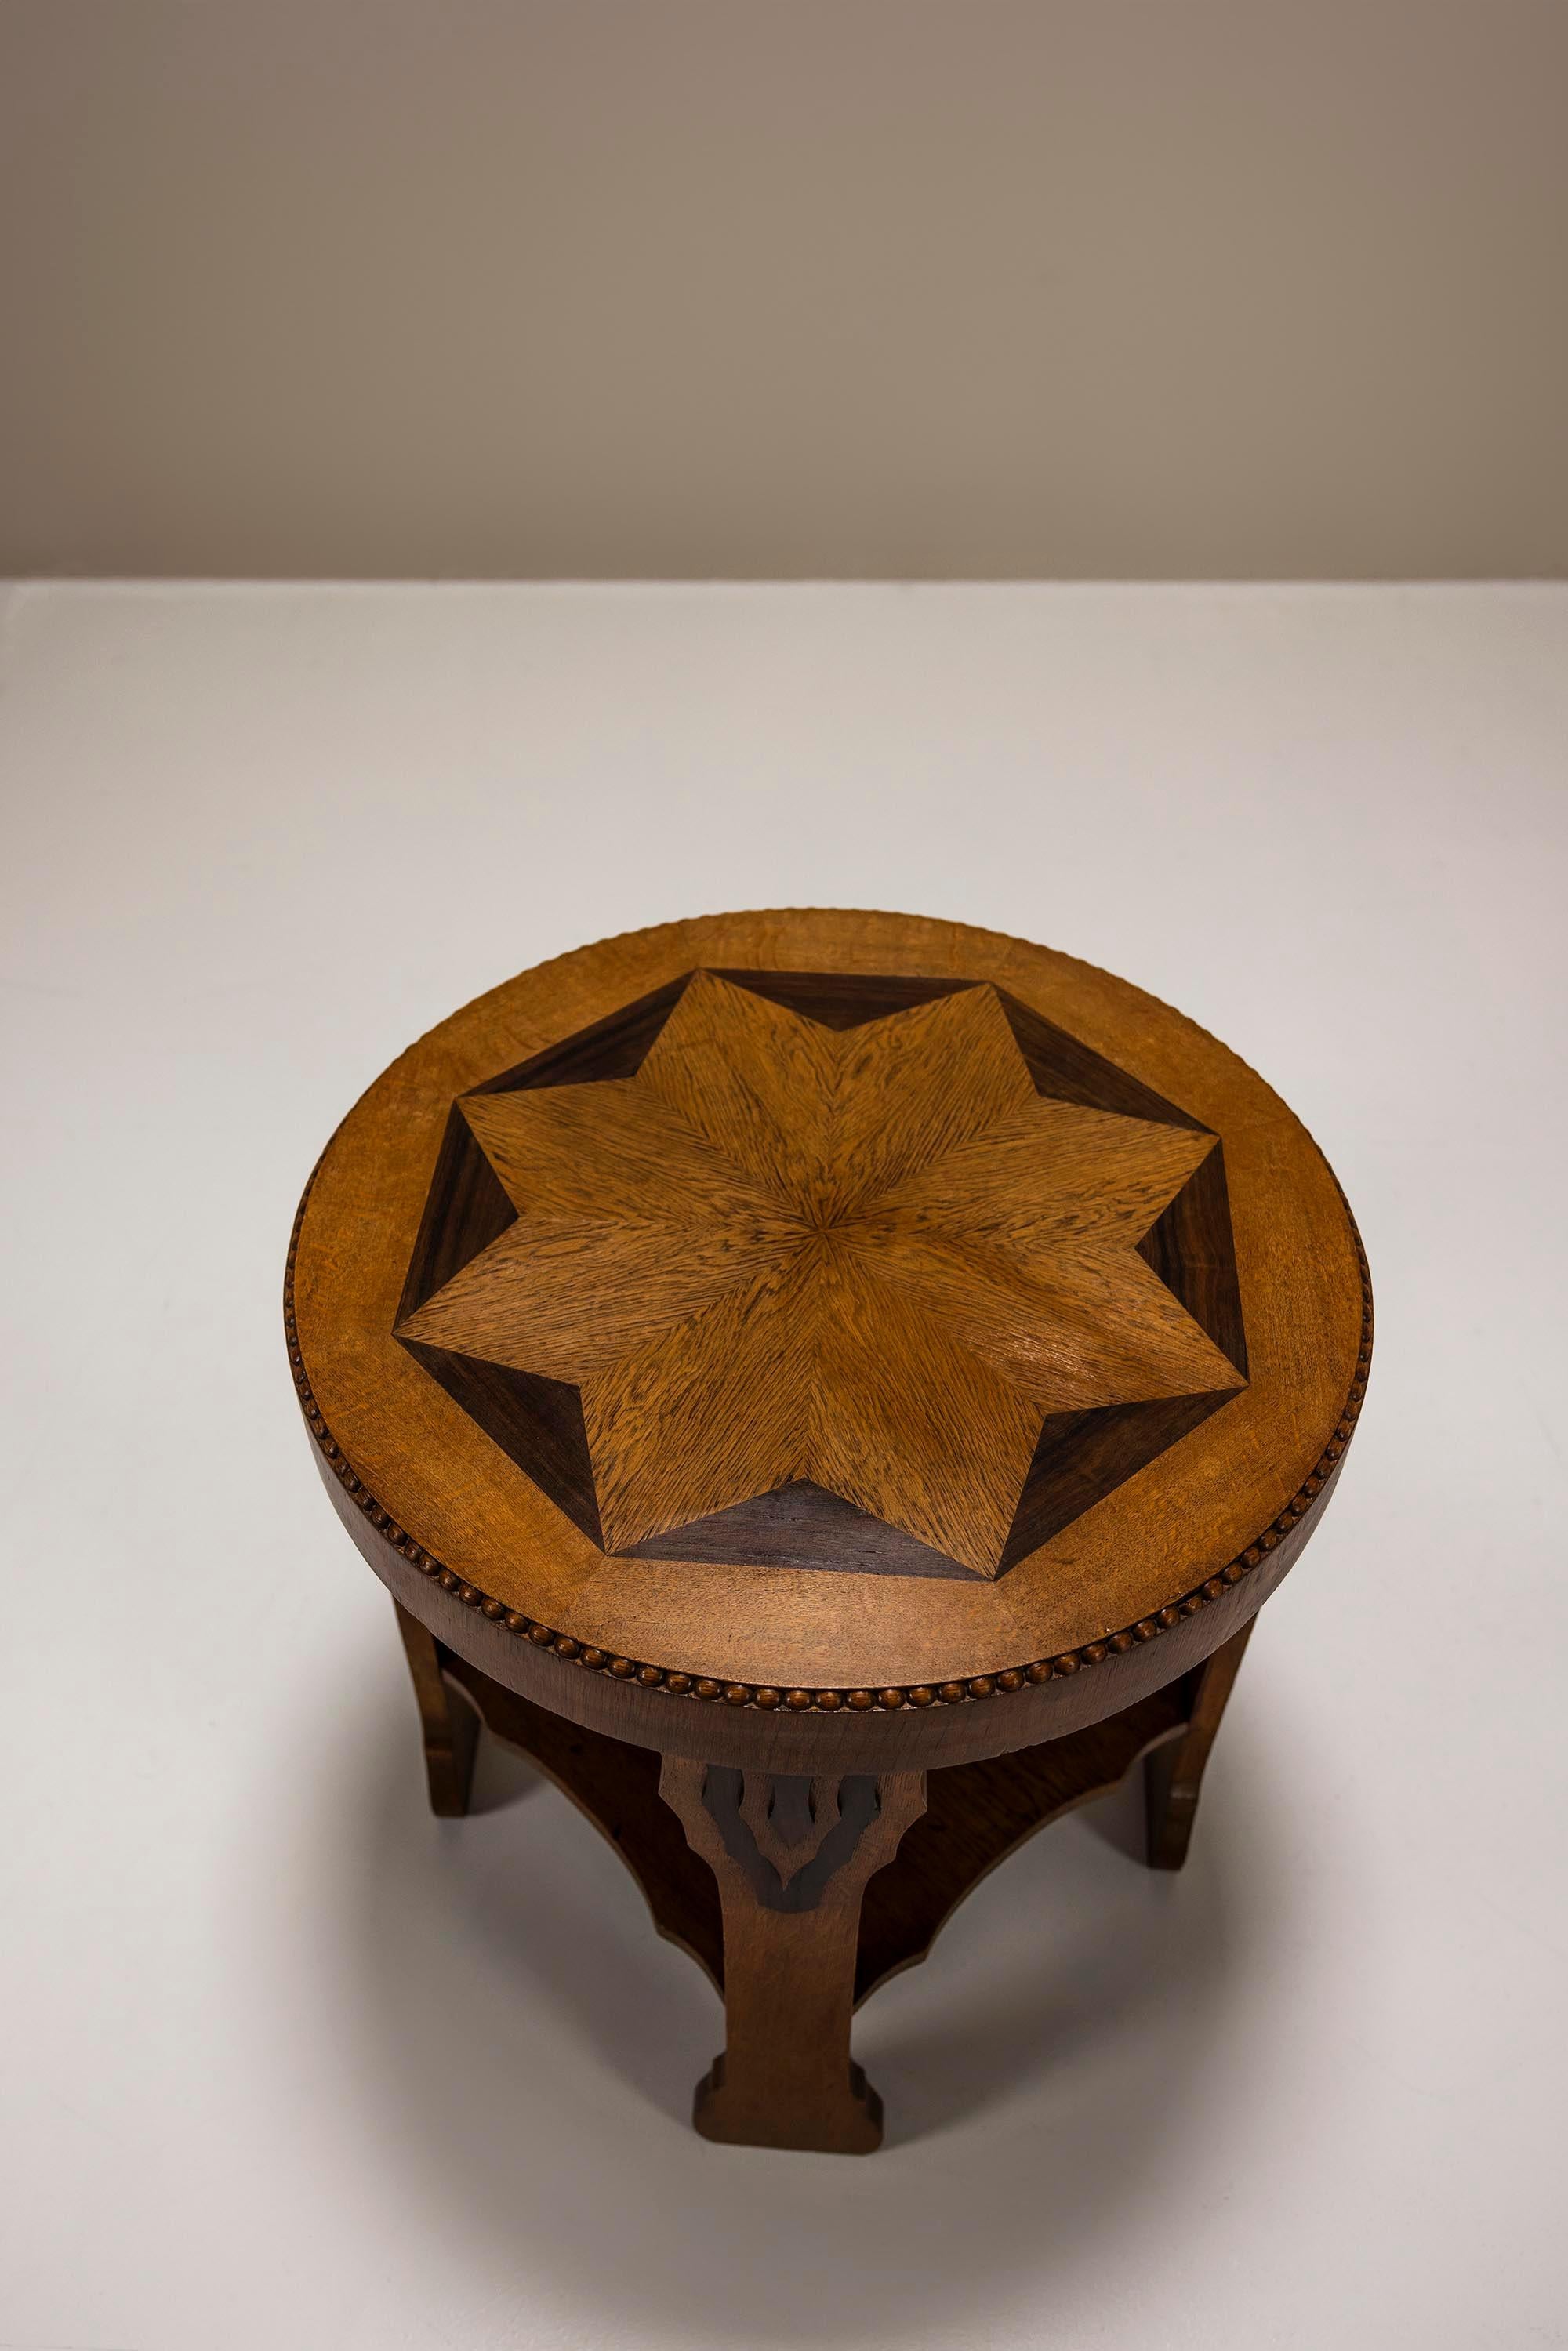 Mid-20th Century Amsterdam School Round Side Table in Oak and Ebony, 1930s For Sale